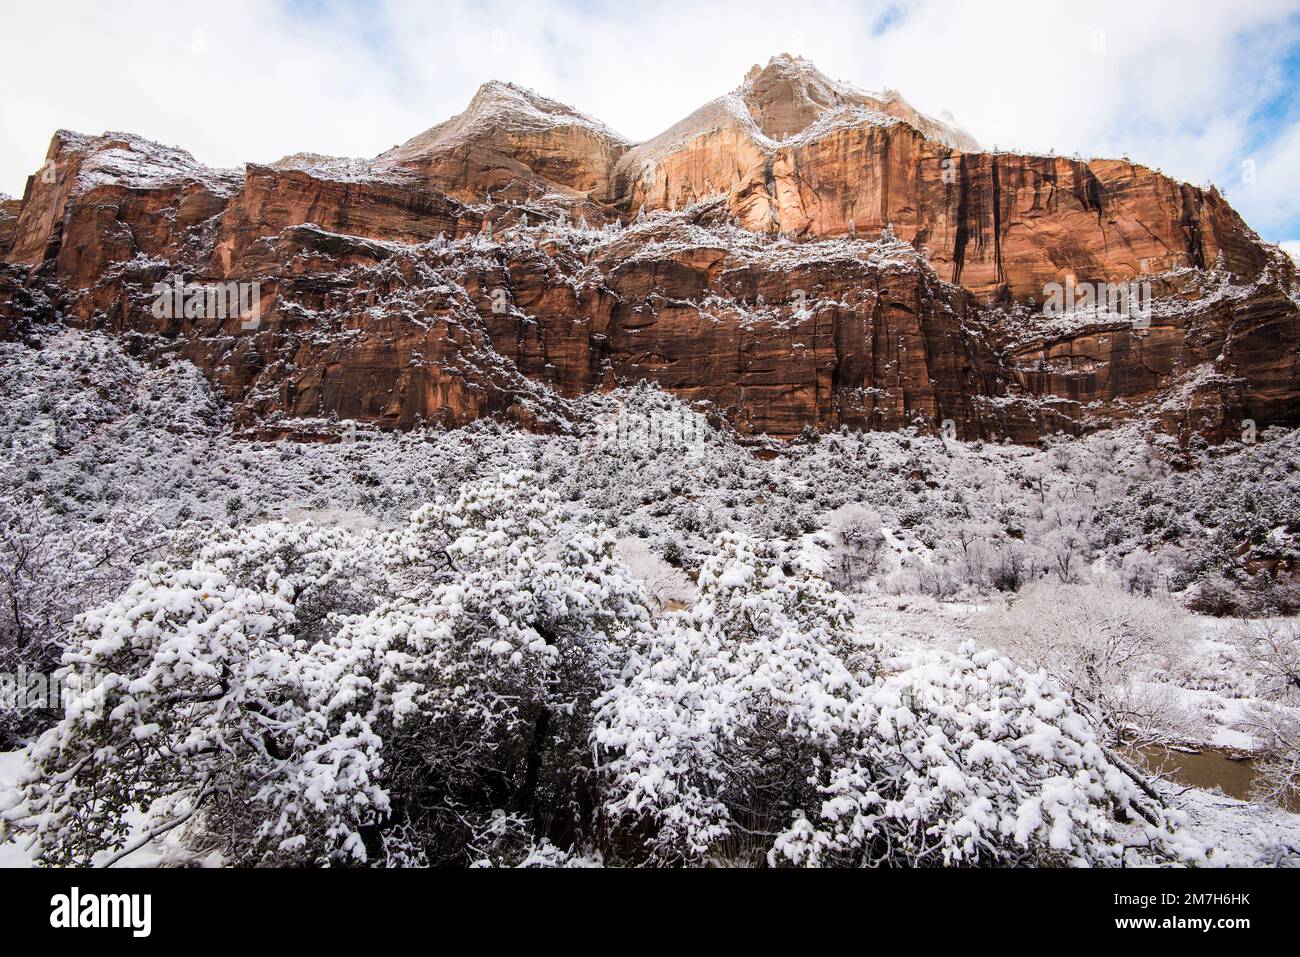 Winter snowfall in Zions National Park, Utah, USA.  This magnificent park is transformed into a winter wonderland after a heavy storm. Stock Photo